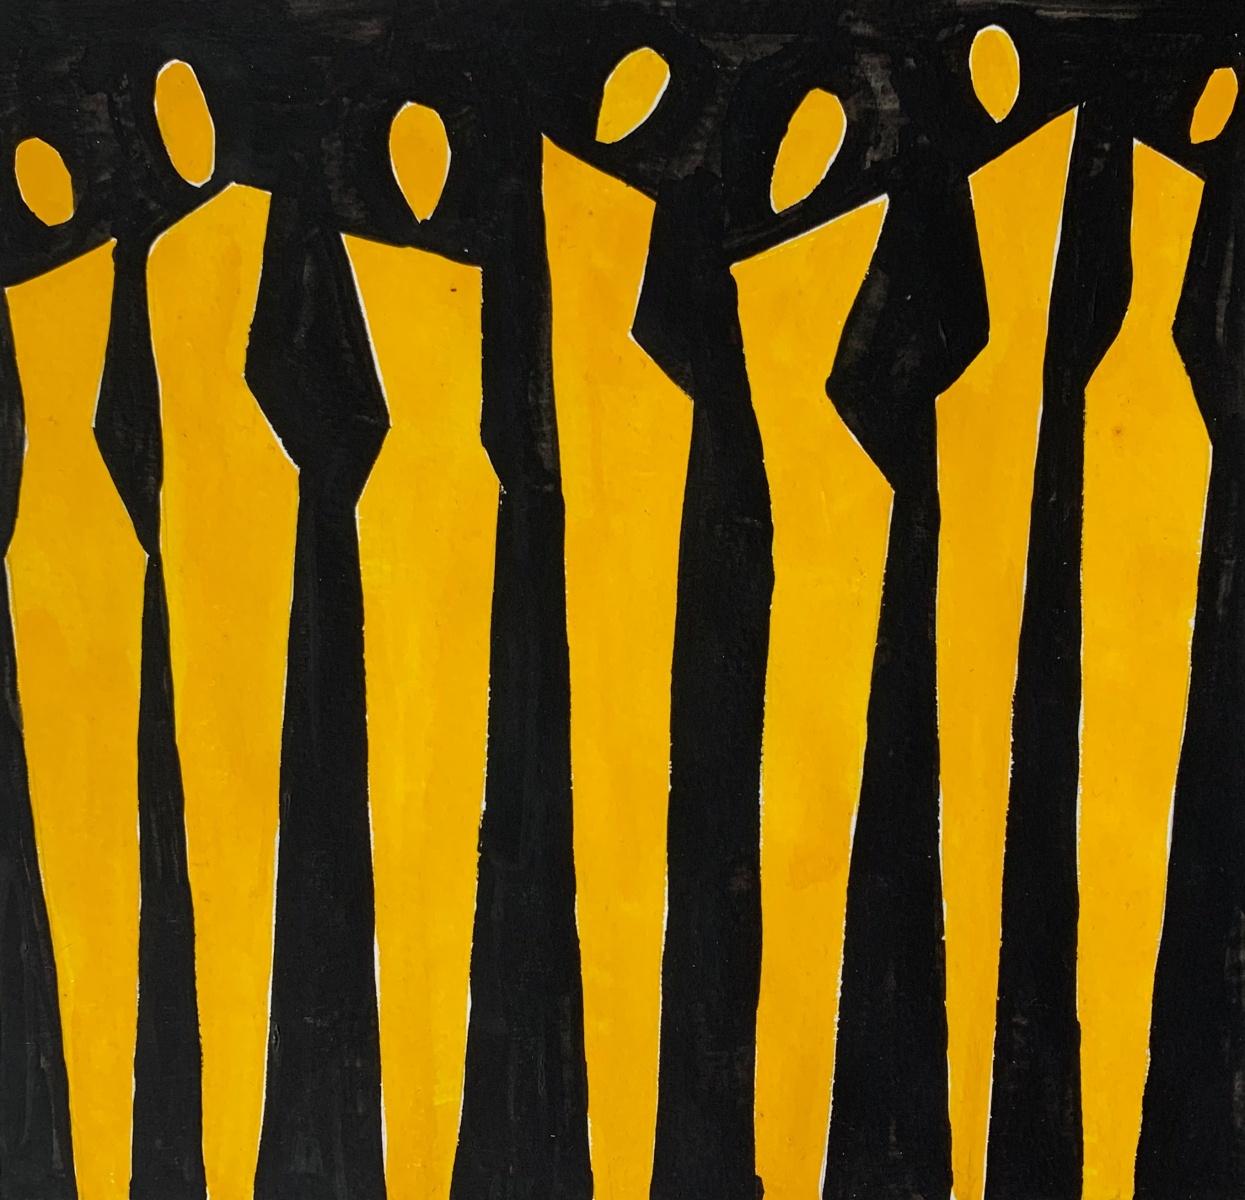 Figurative acrylic on paper painting by young professional European artist Waleria Matelska. Artwork is minimalistic and composed with synthetic shapes. Painting is vibrant- main colors are yellow and black. There are many human figures on the